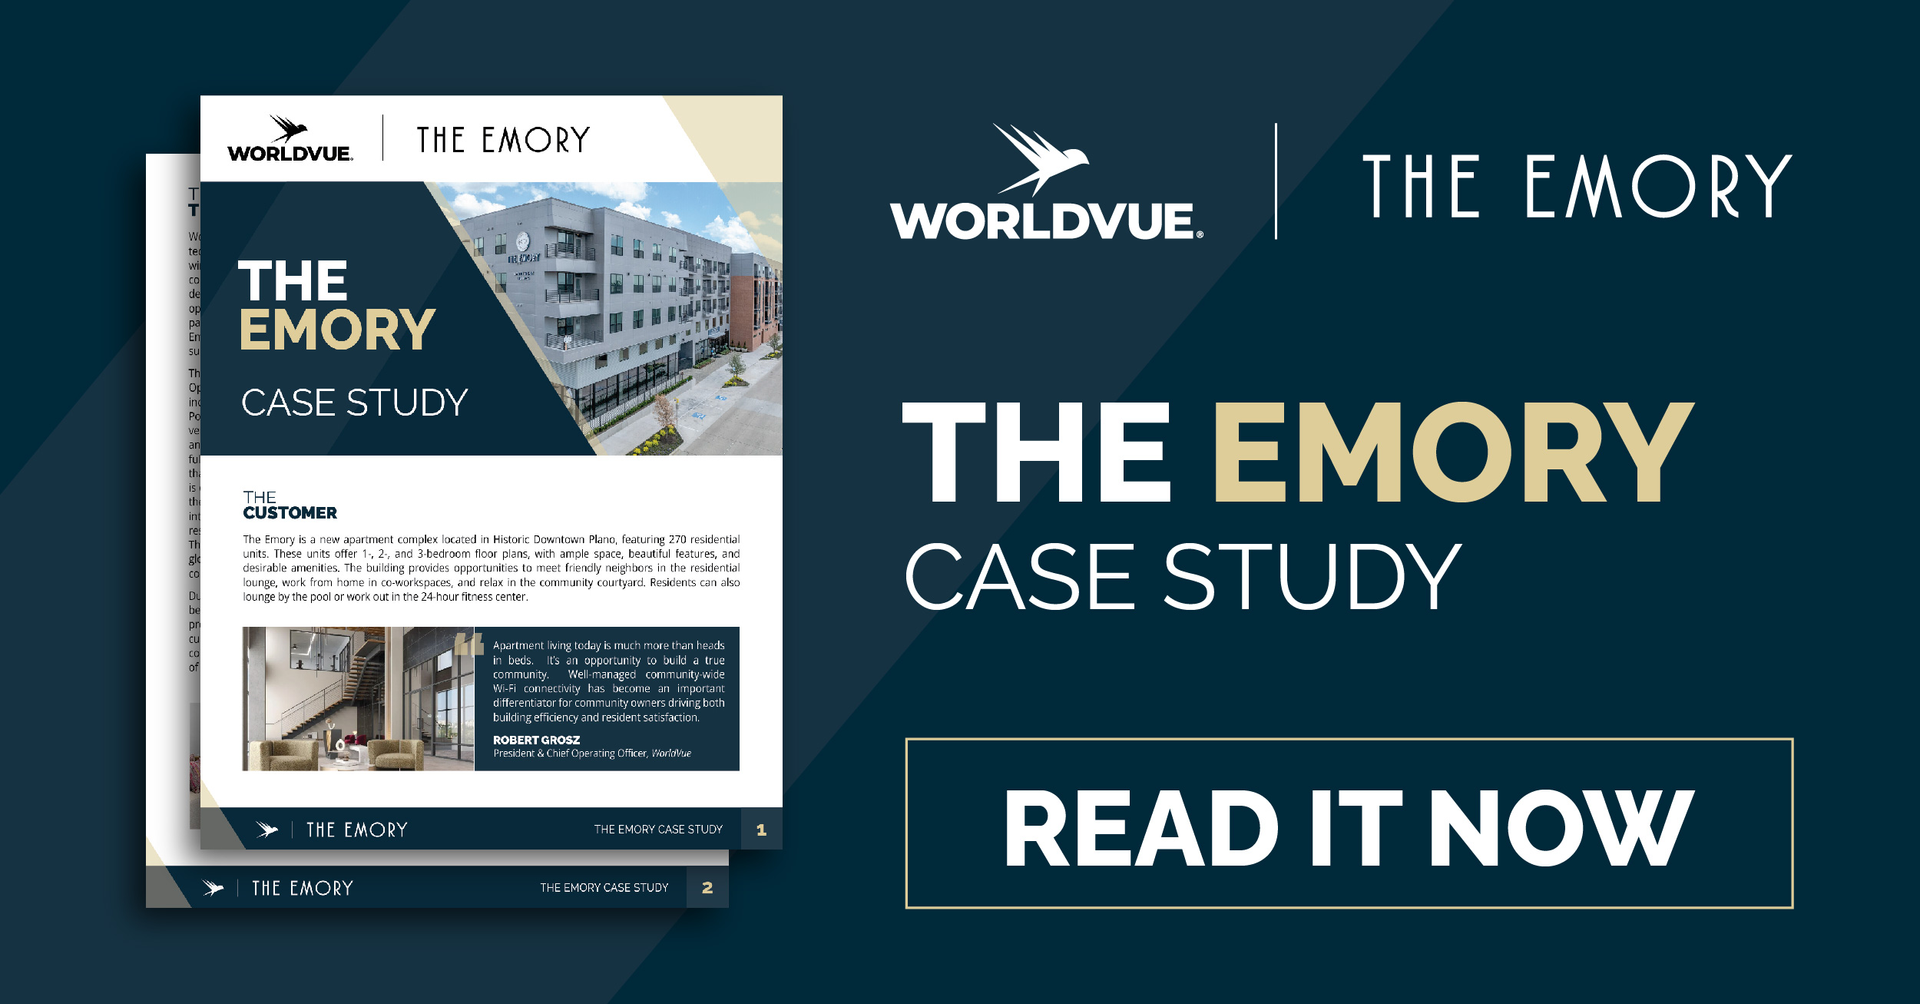 graphic with preview of The Emory case study, with WorldVue and The Emory logos and an invitation to Read It Now